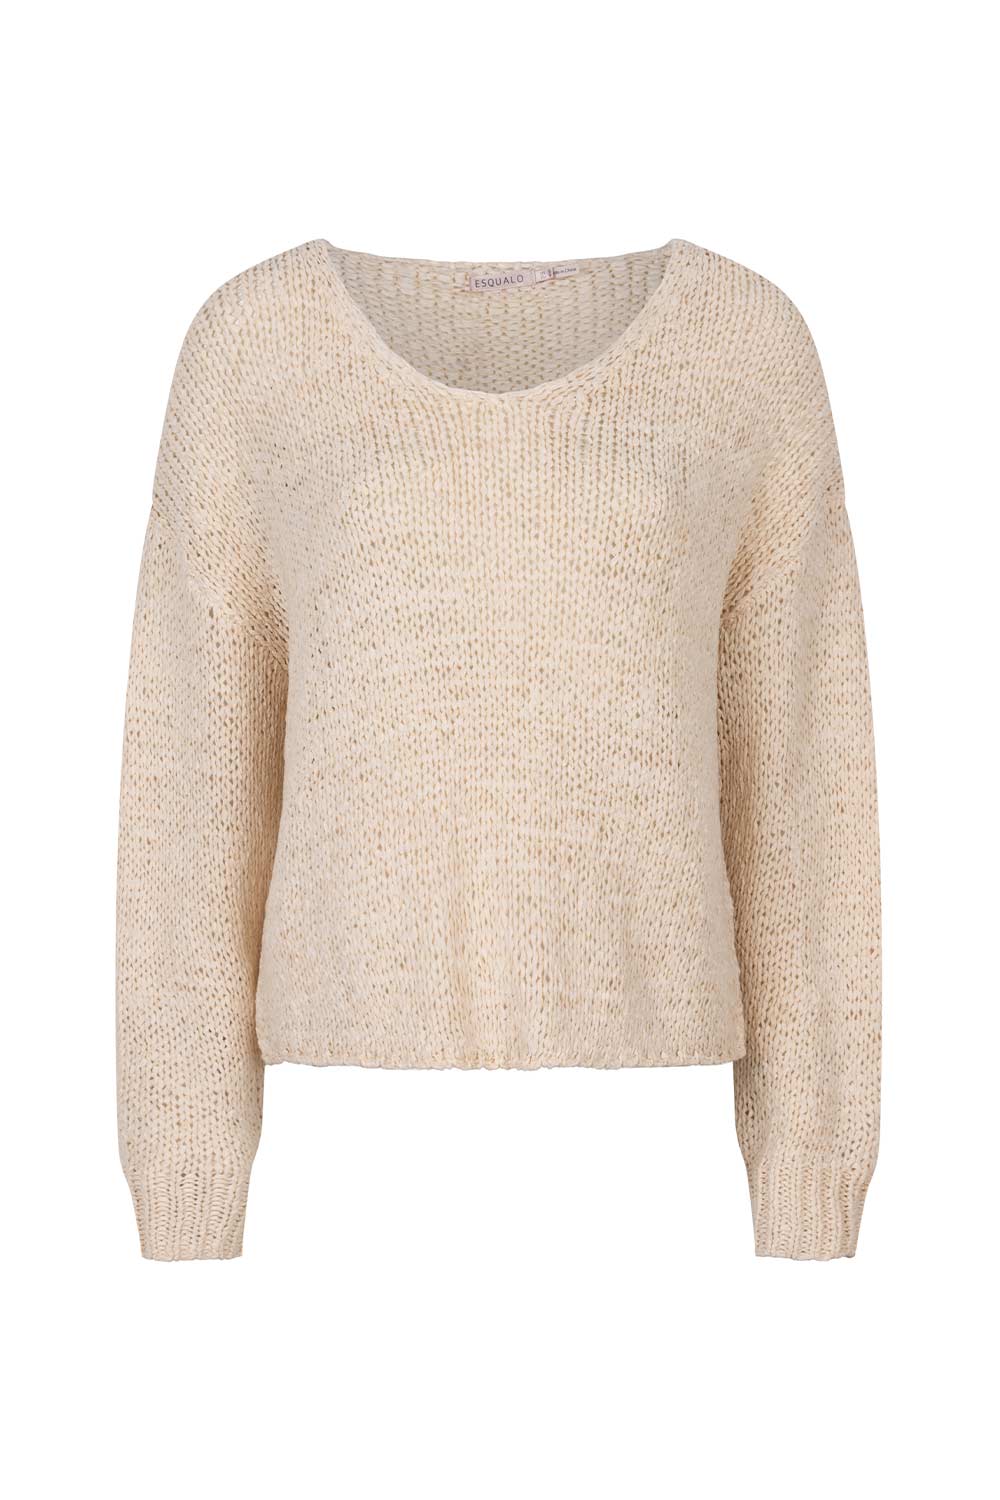 Esqualo (SP2418101) Women's Long Sleeve Loose Knit Tape Yarn Sweater With Drop Shoulders and Relaxed fit in Sand Beige